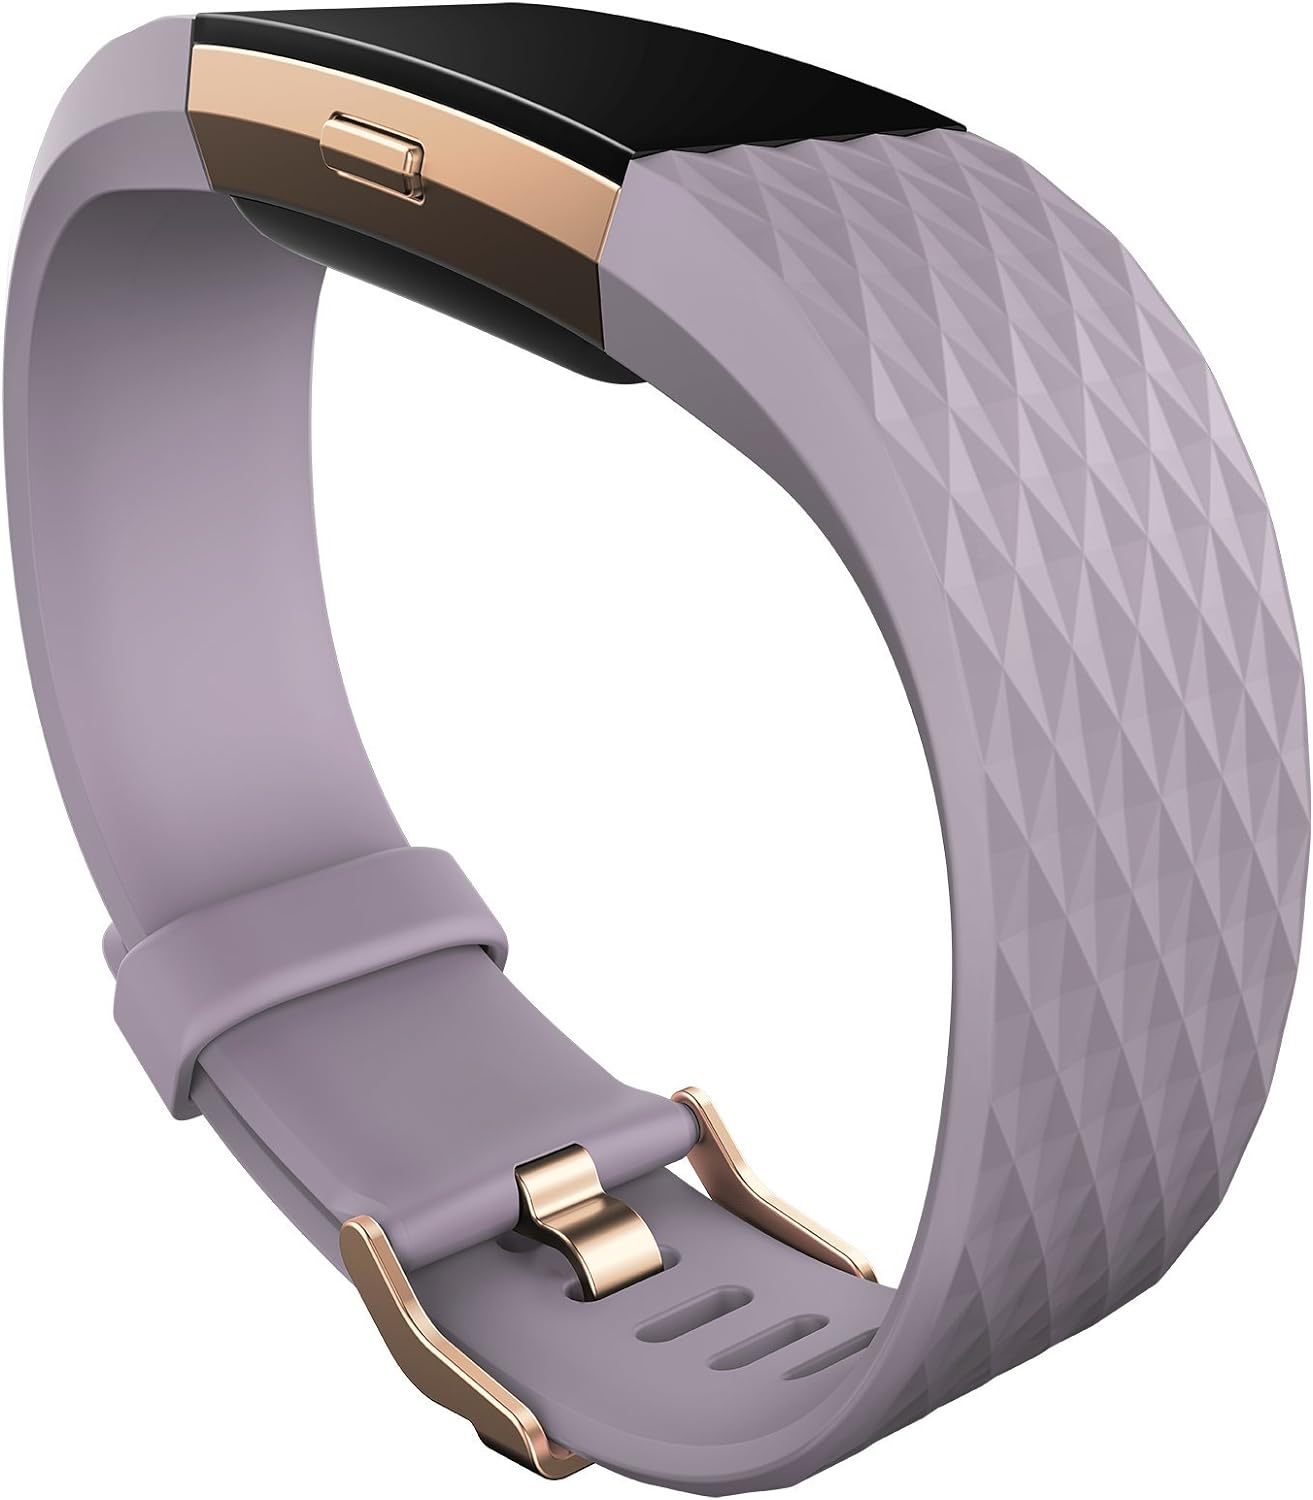 Fitbit Charge 2 Activity Tracker - Lavender Special Edition - Refurbished Good